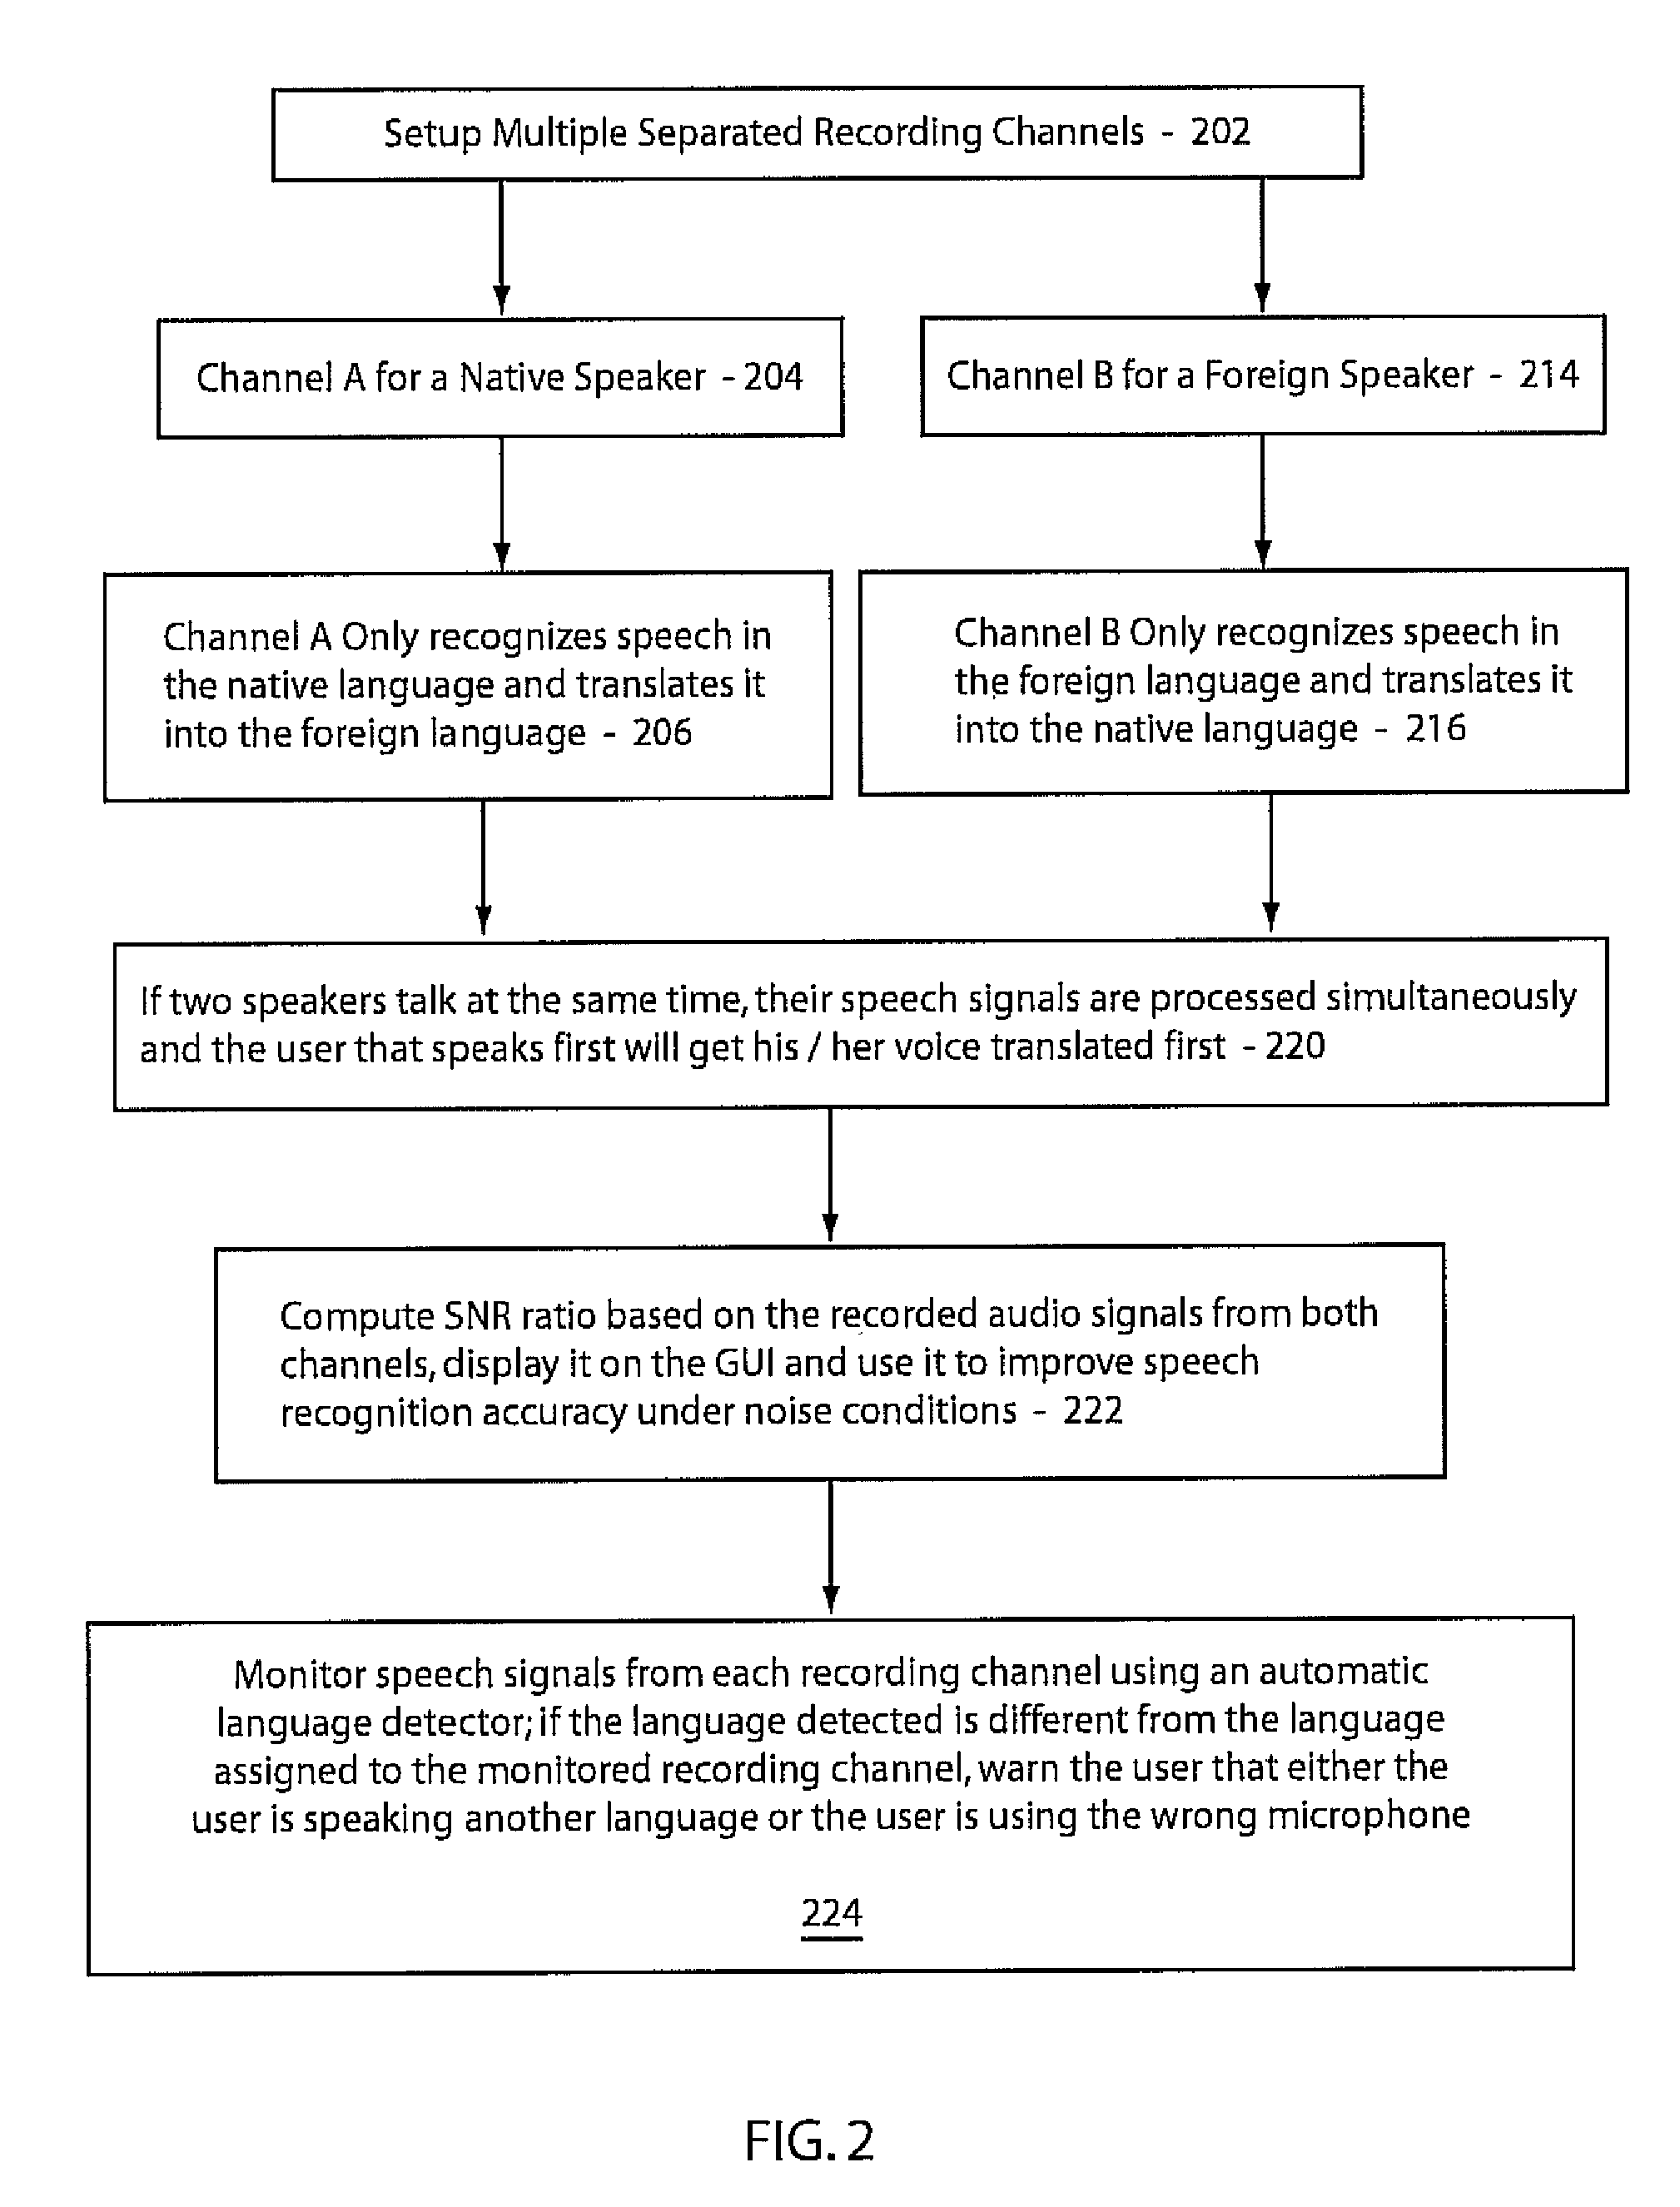 Using separate recording channels for speech-to-speech translation systems